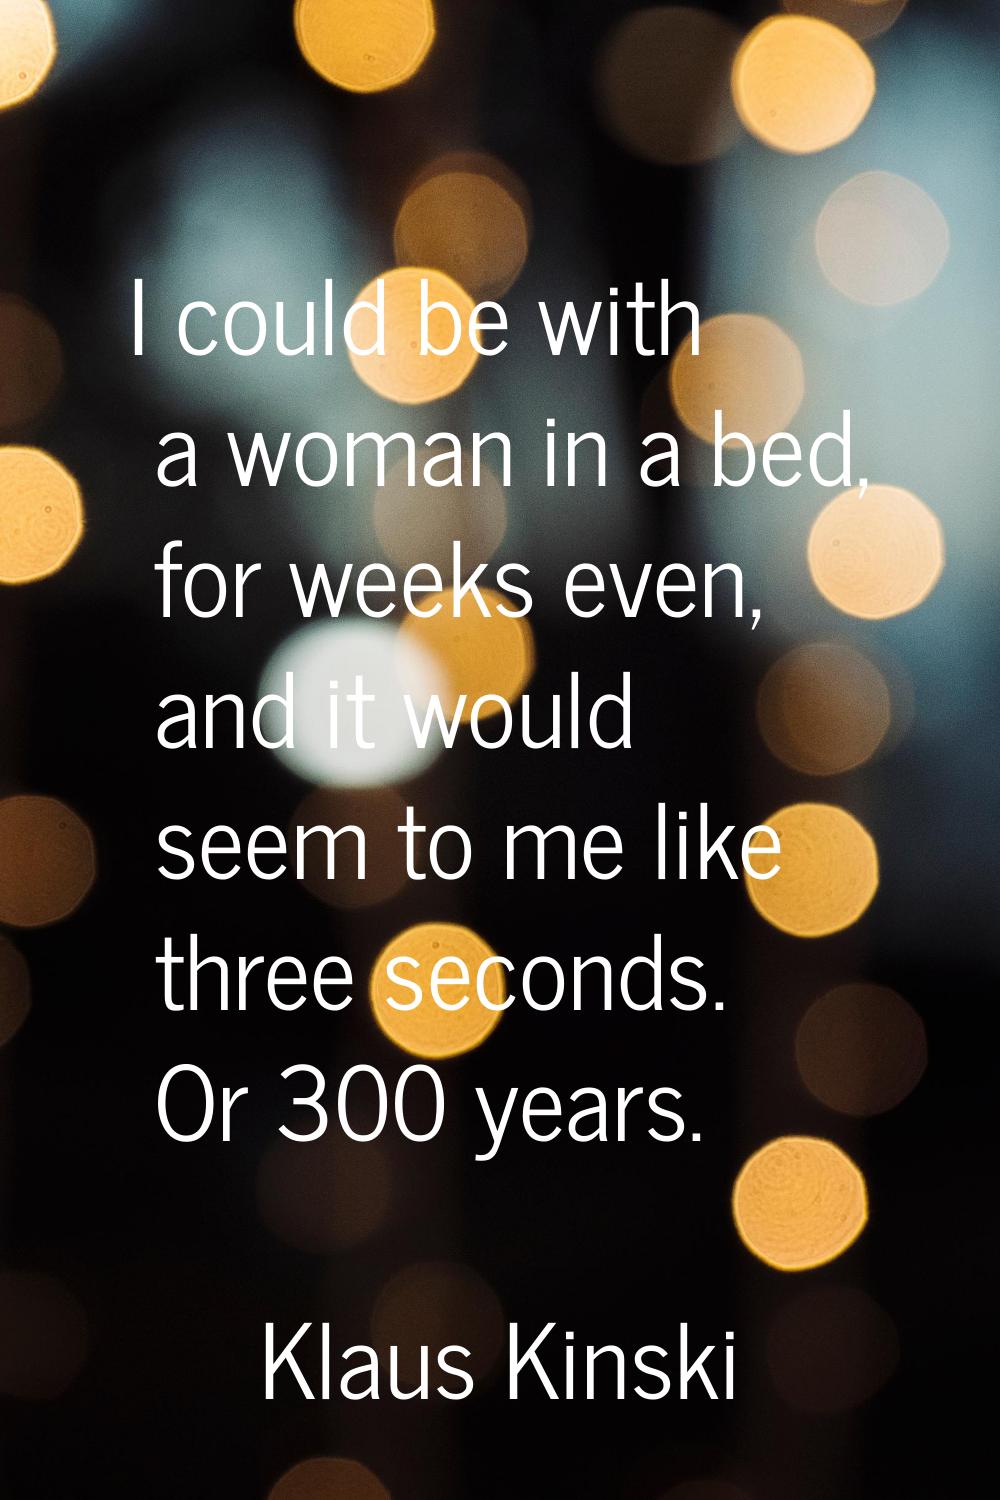 I could be with a woman in a bed, for weeks even, and it would seem to me like three seconds. Or 30